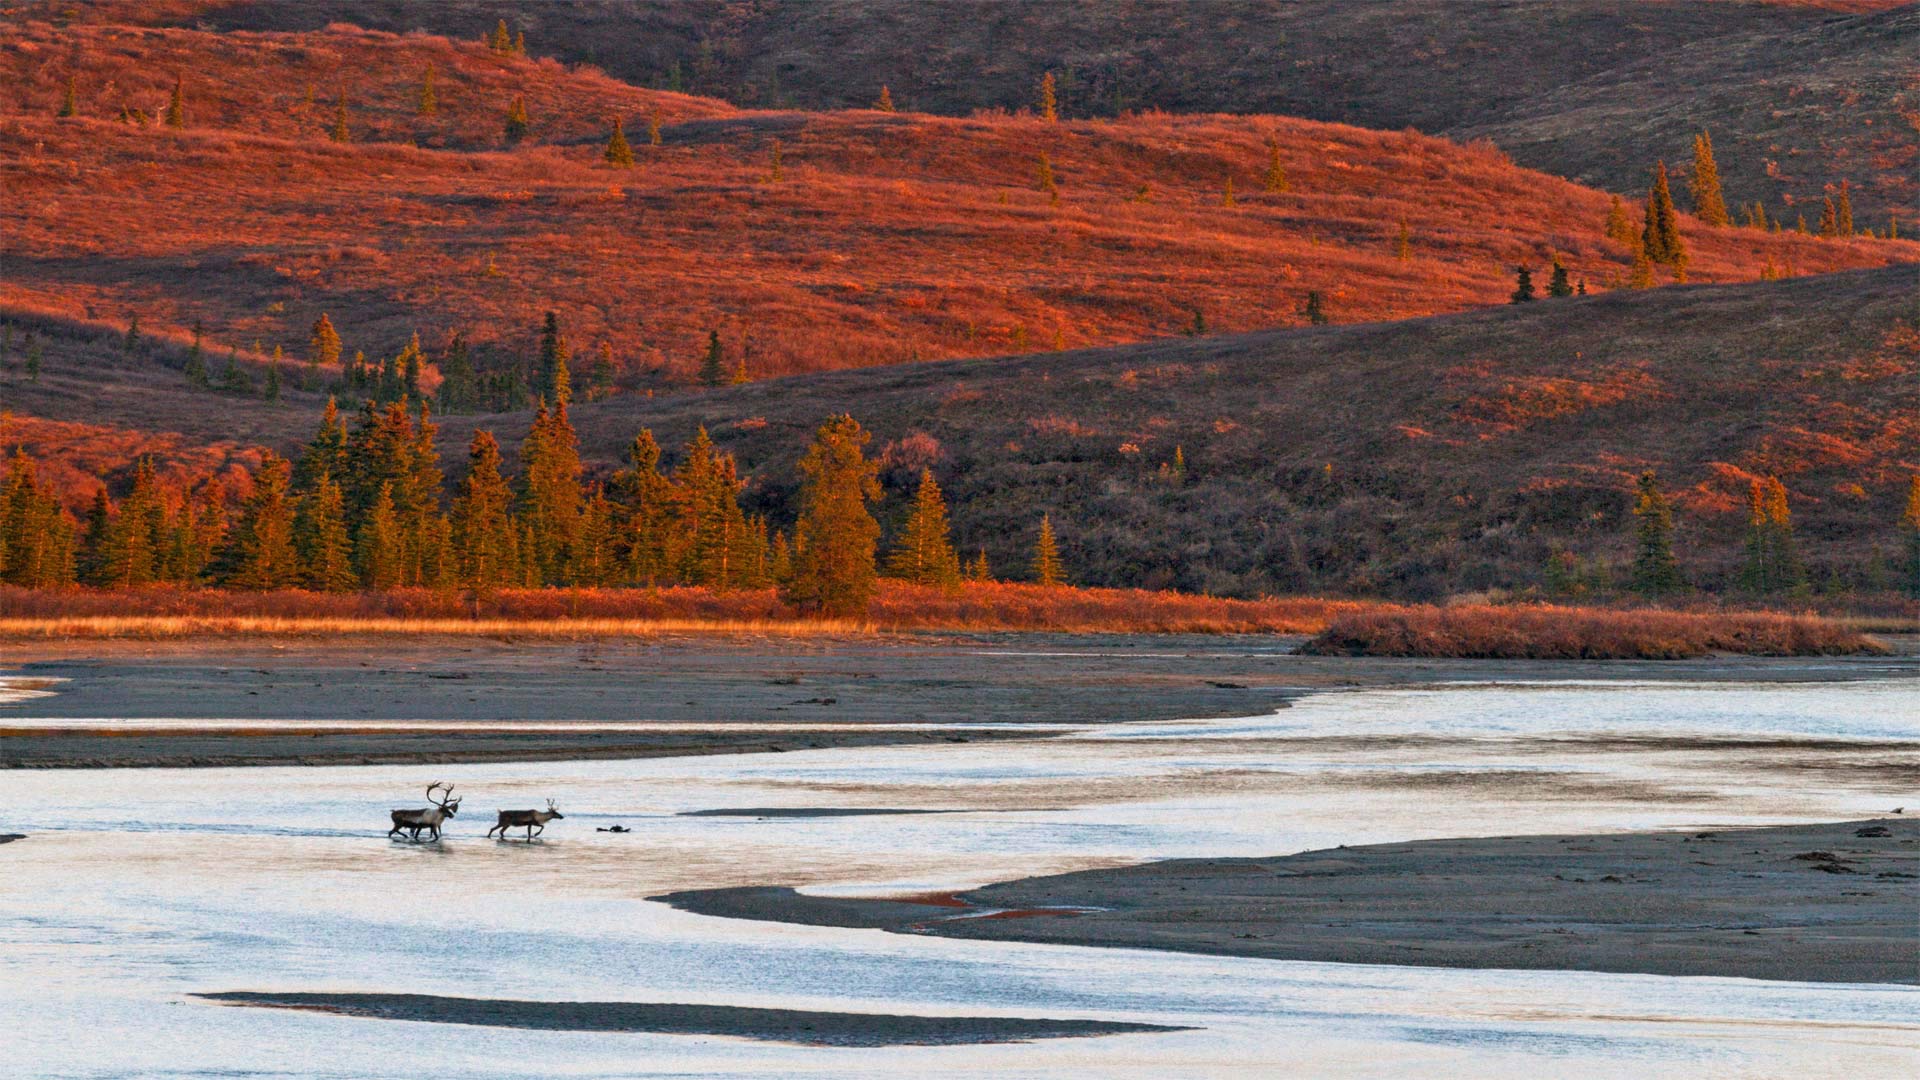 Caribou crossing the Susitna River during the autumn rut